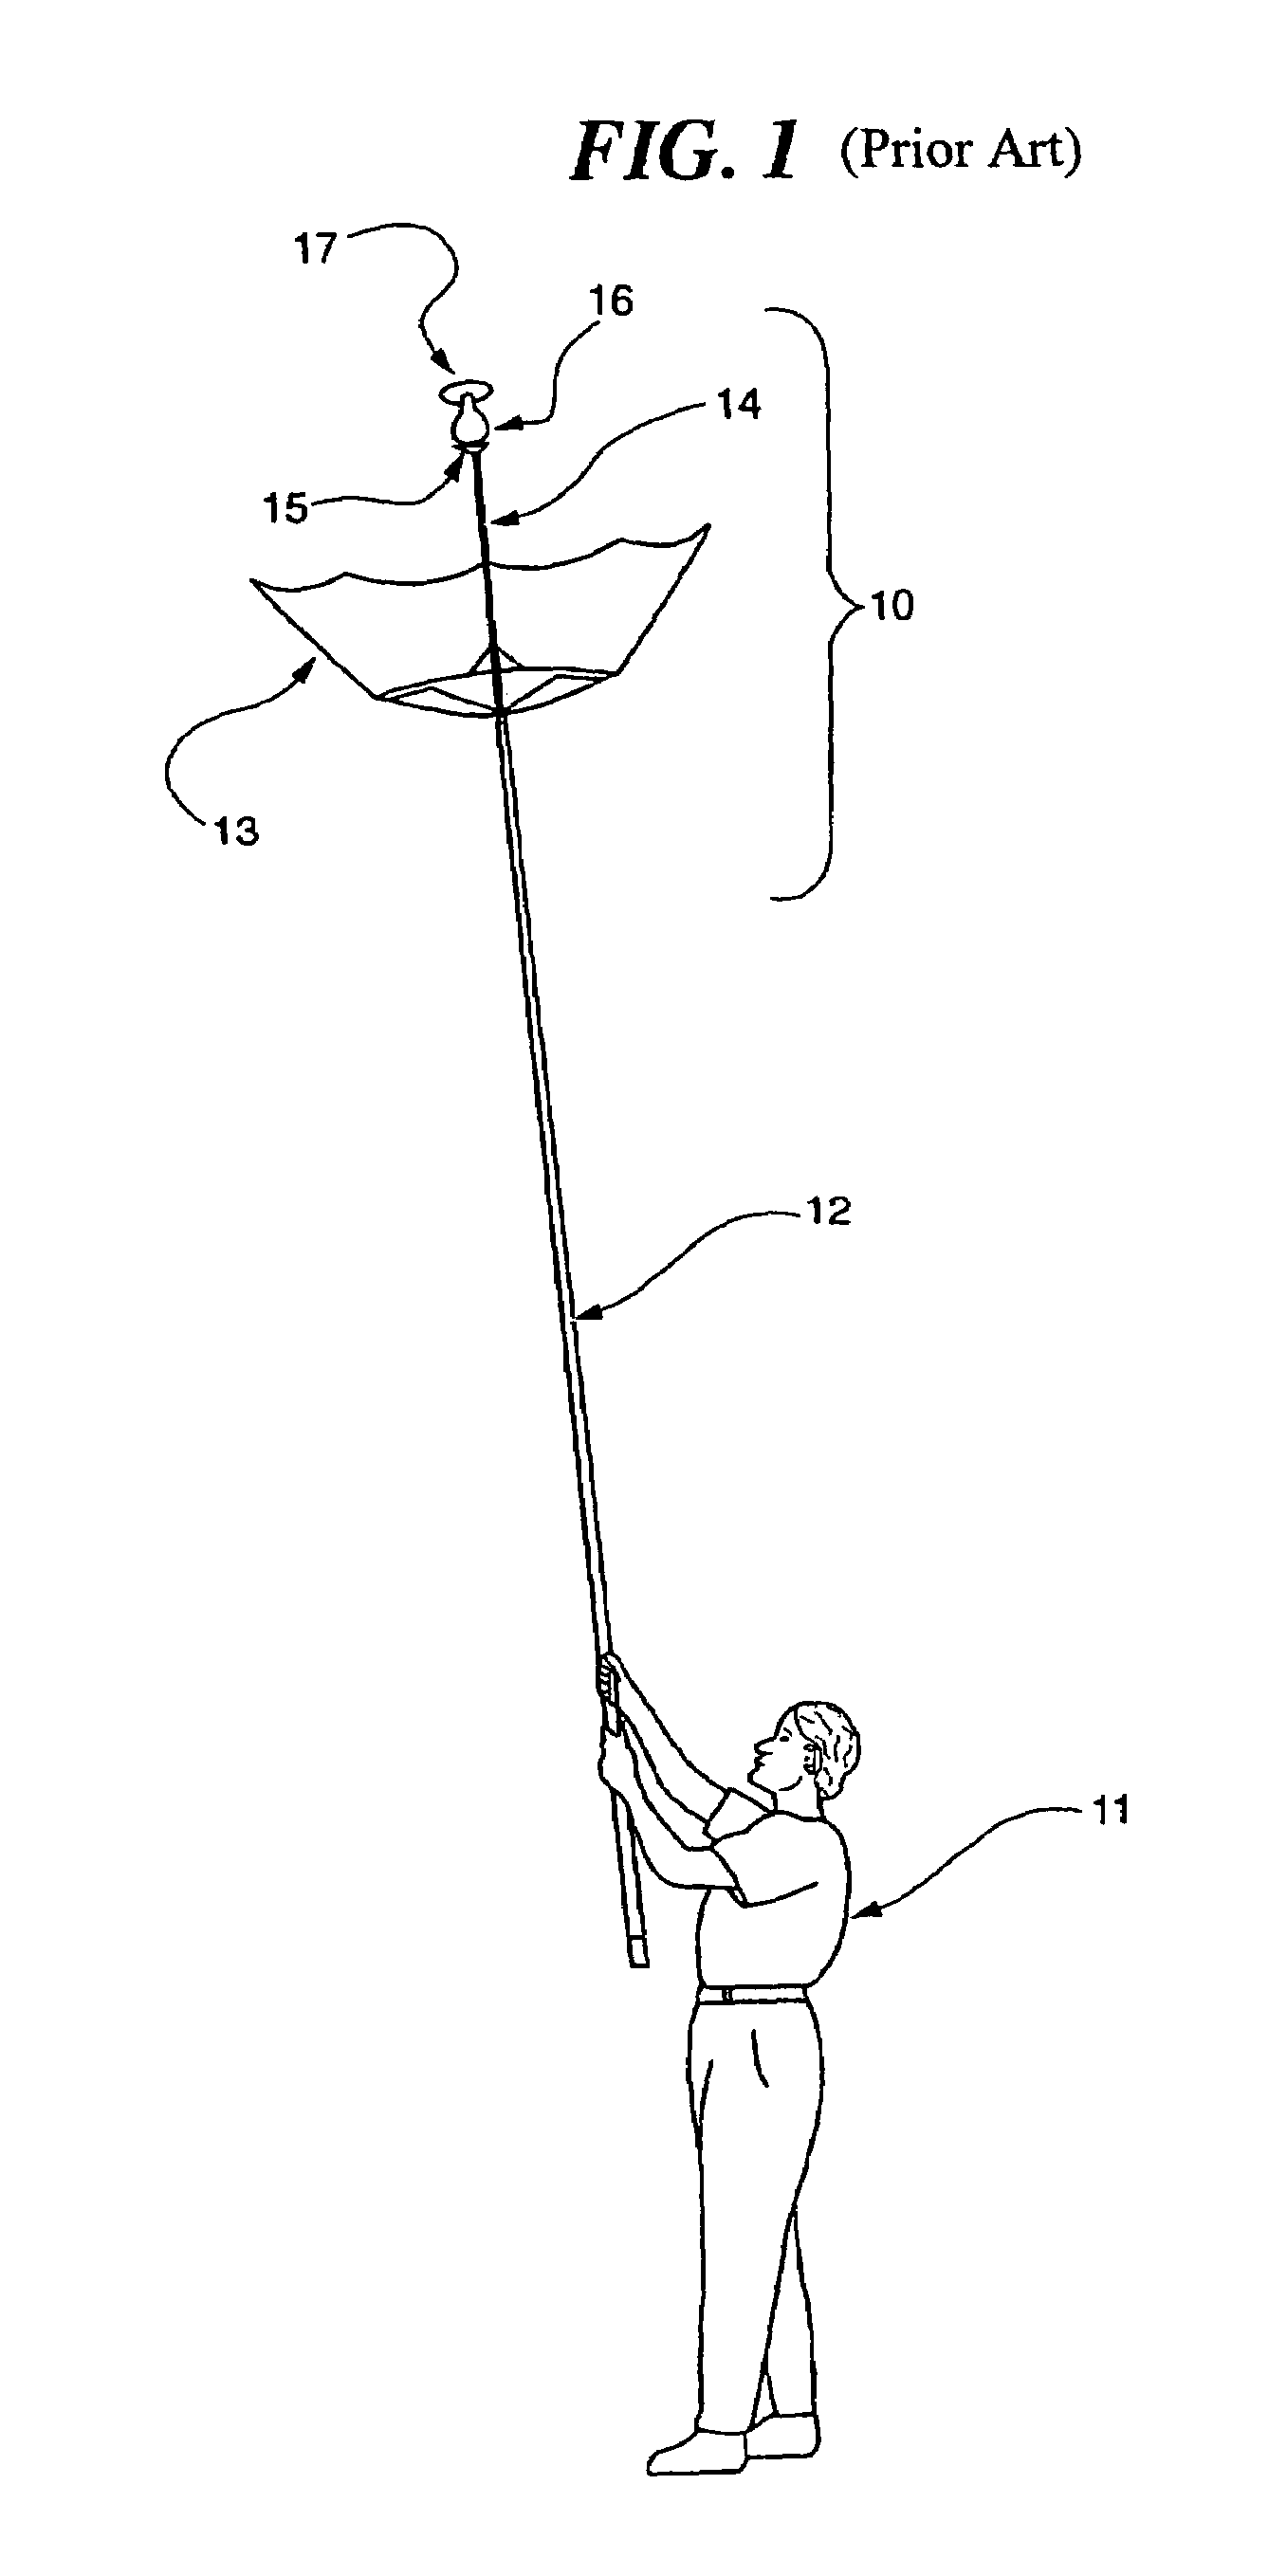 Light bulb catcher for use with a changing device